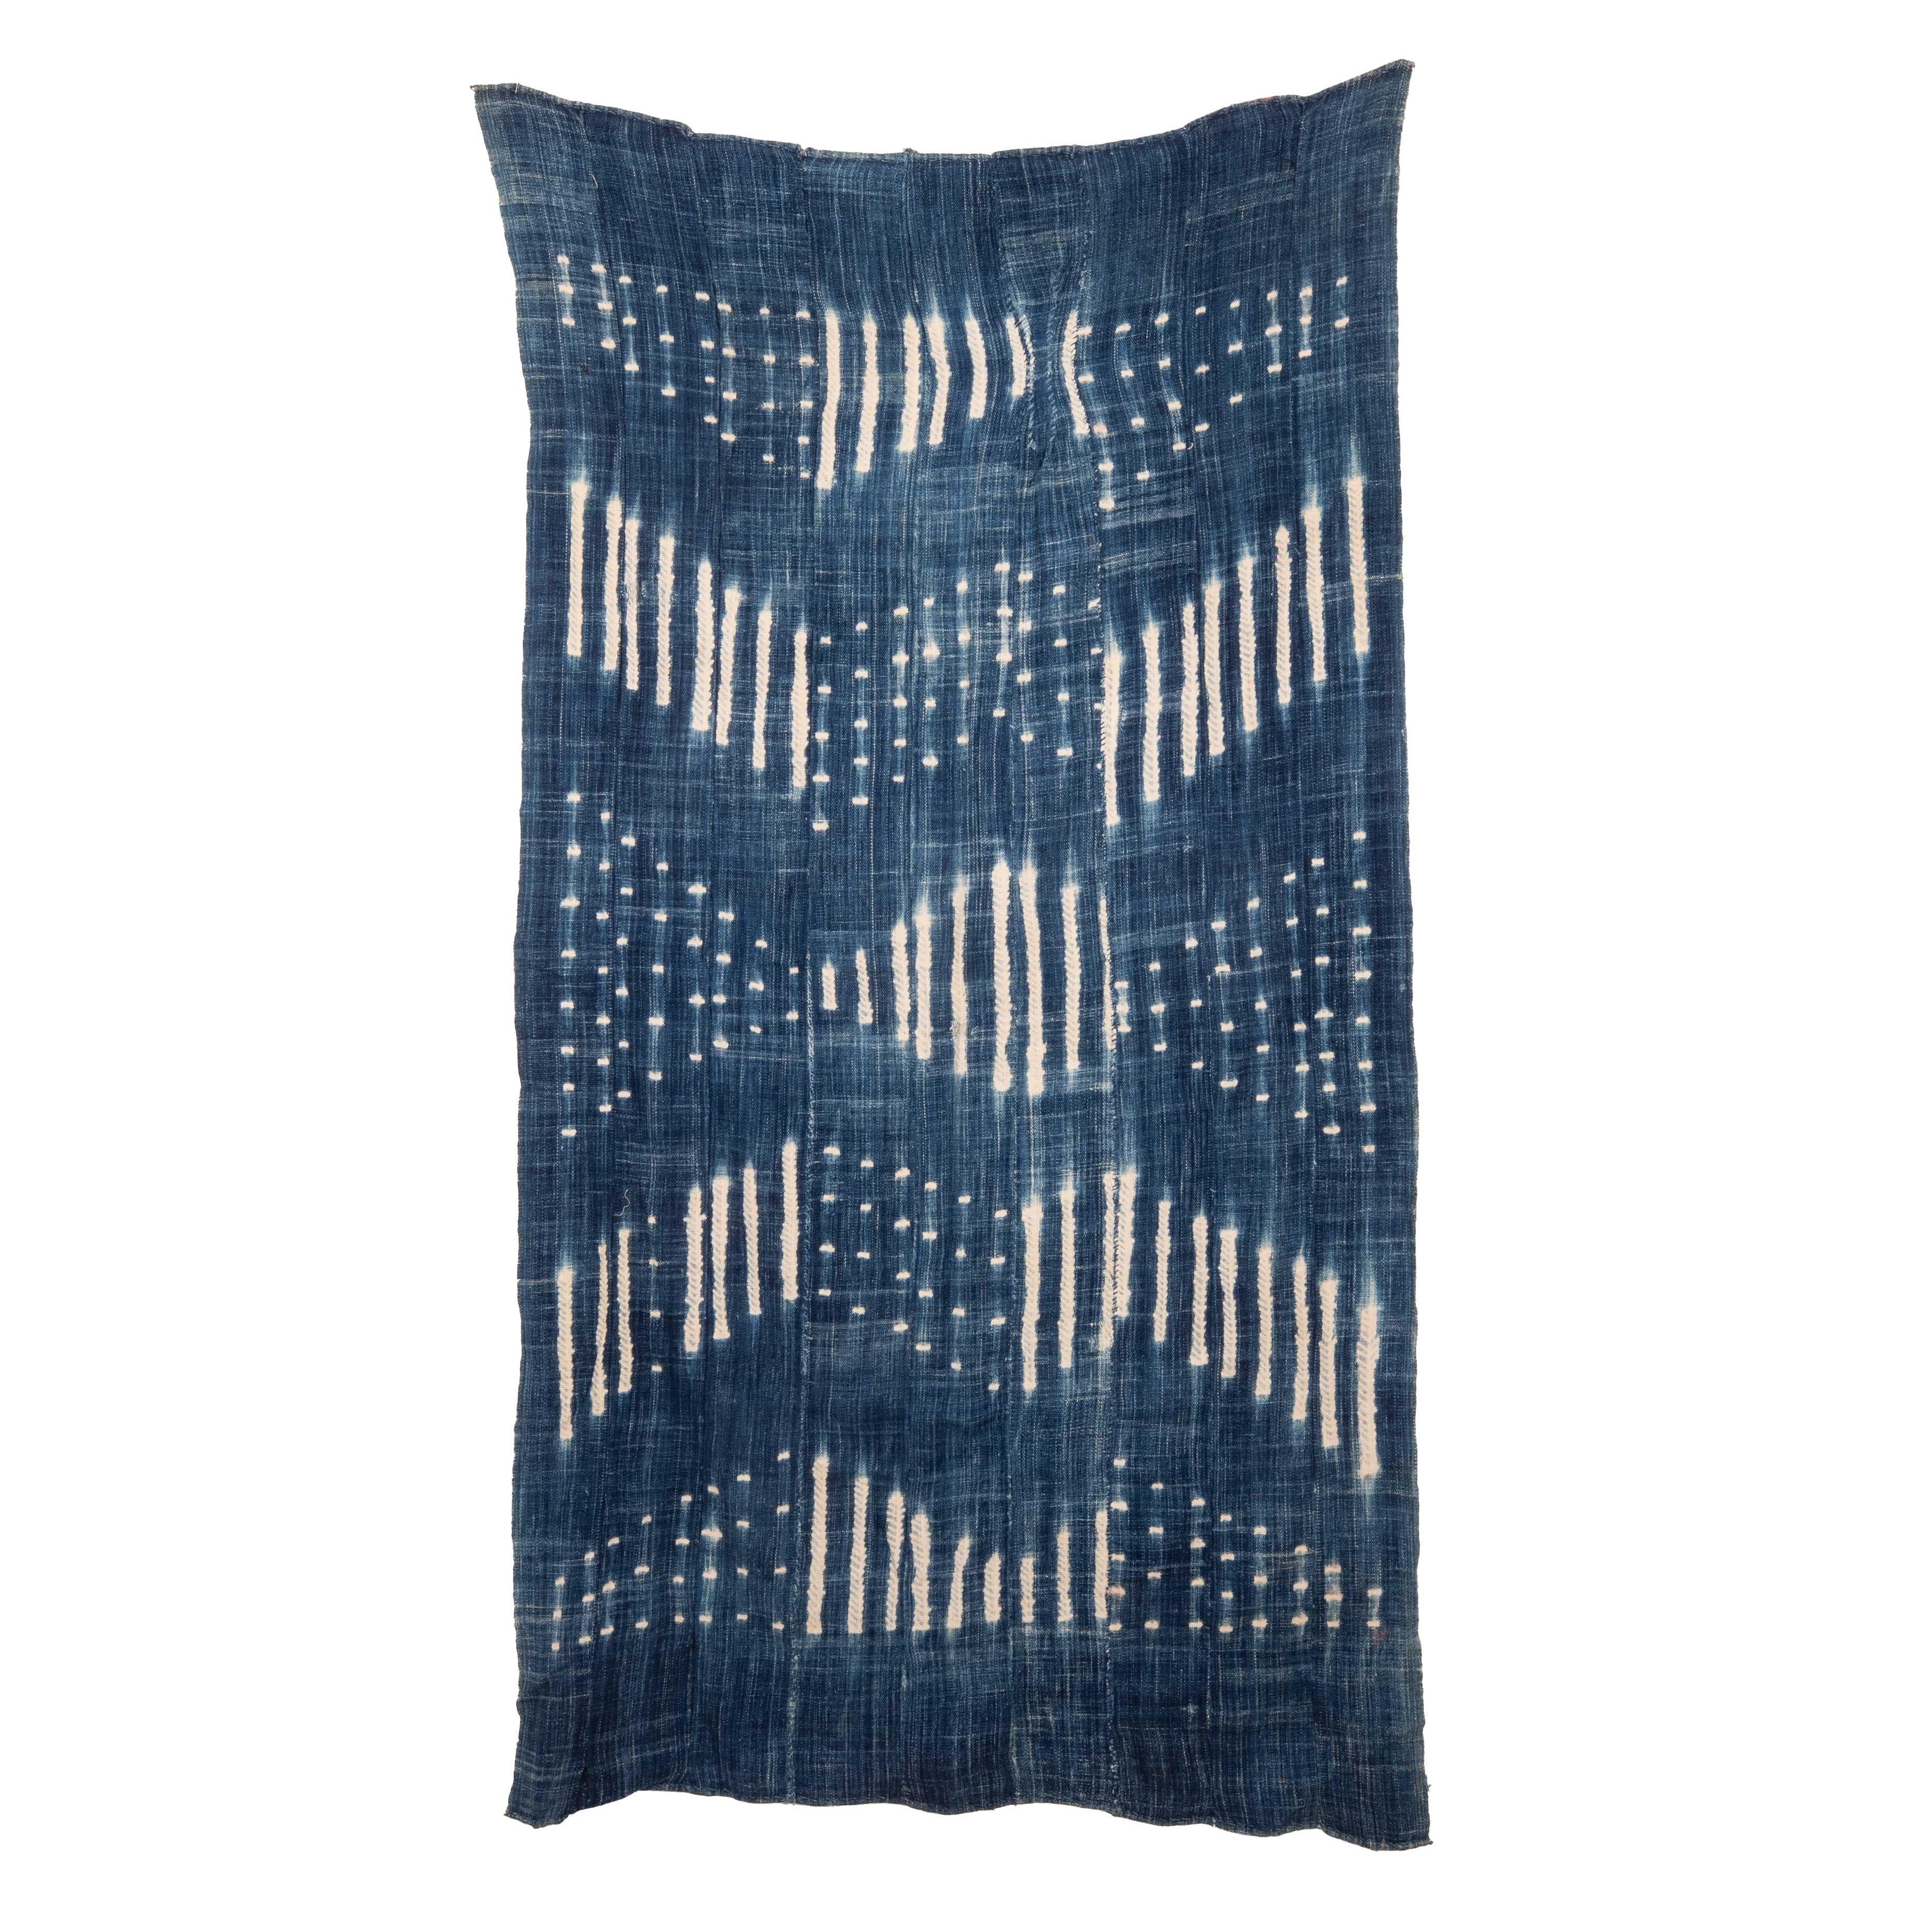 Indigo cloth perfect as a wall hanging or trow.